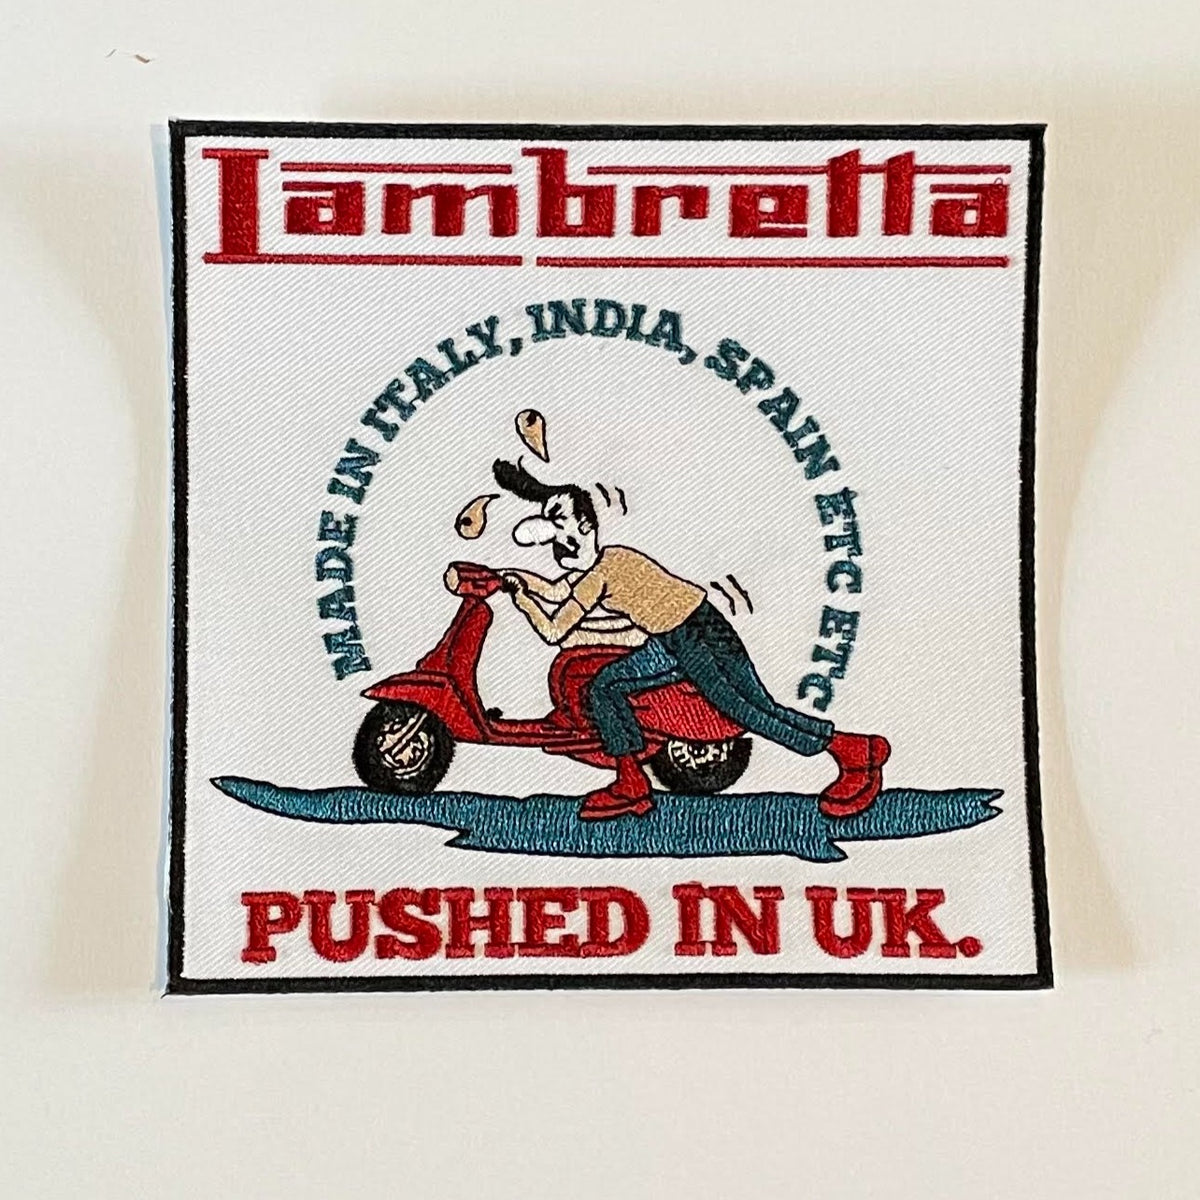 Lambretta Humour - 'Made in Italy, India, Spain, etc, etc....pushed in the UK' - Embroidered Patch